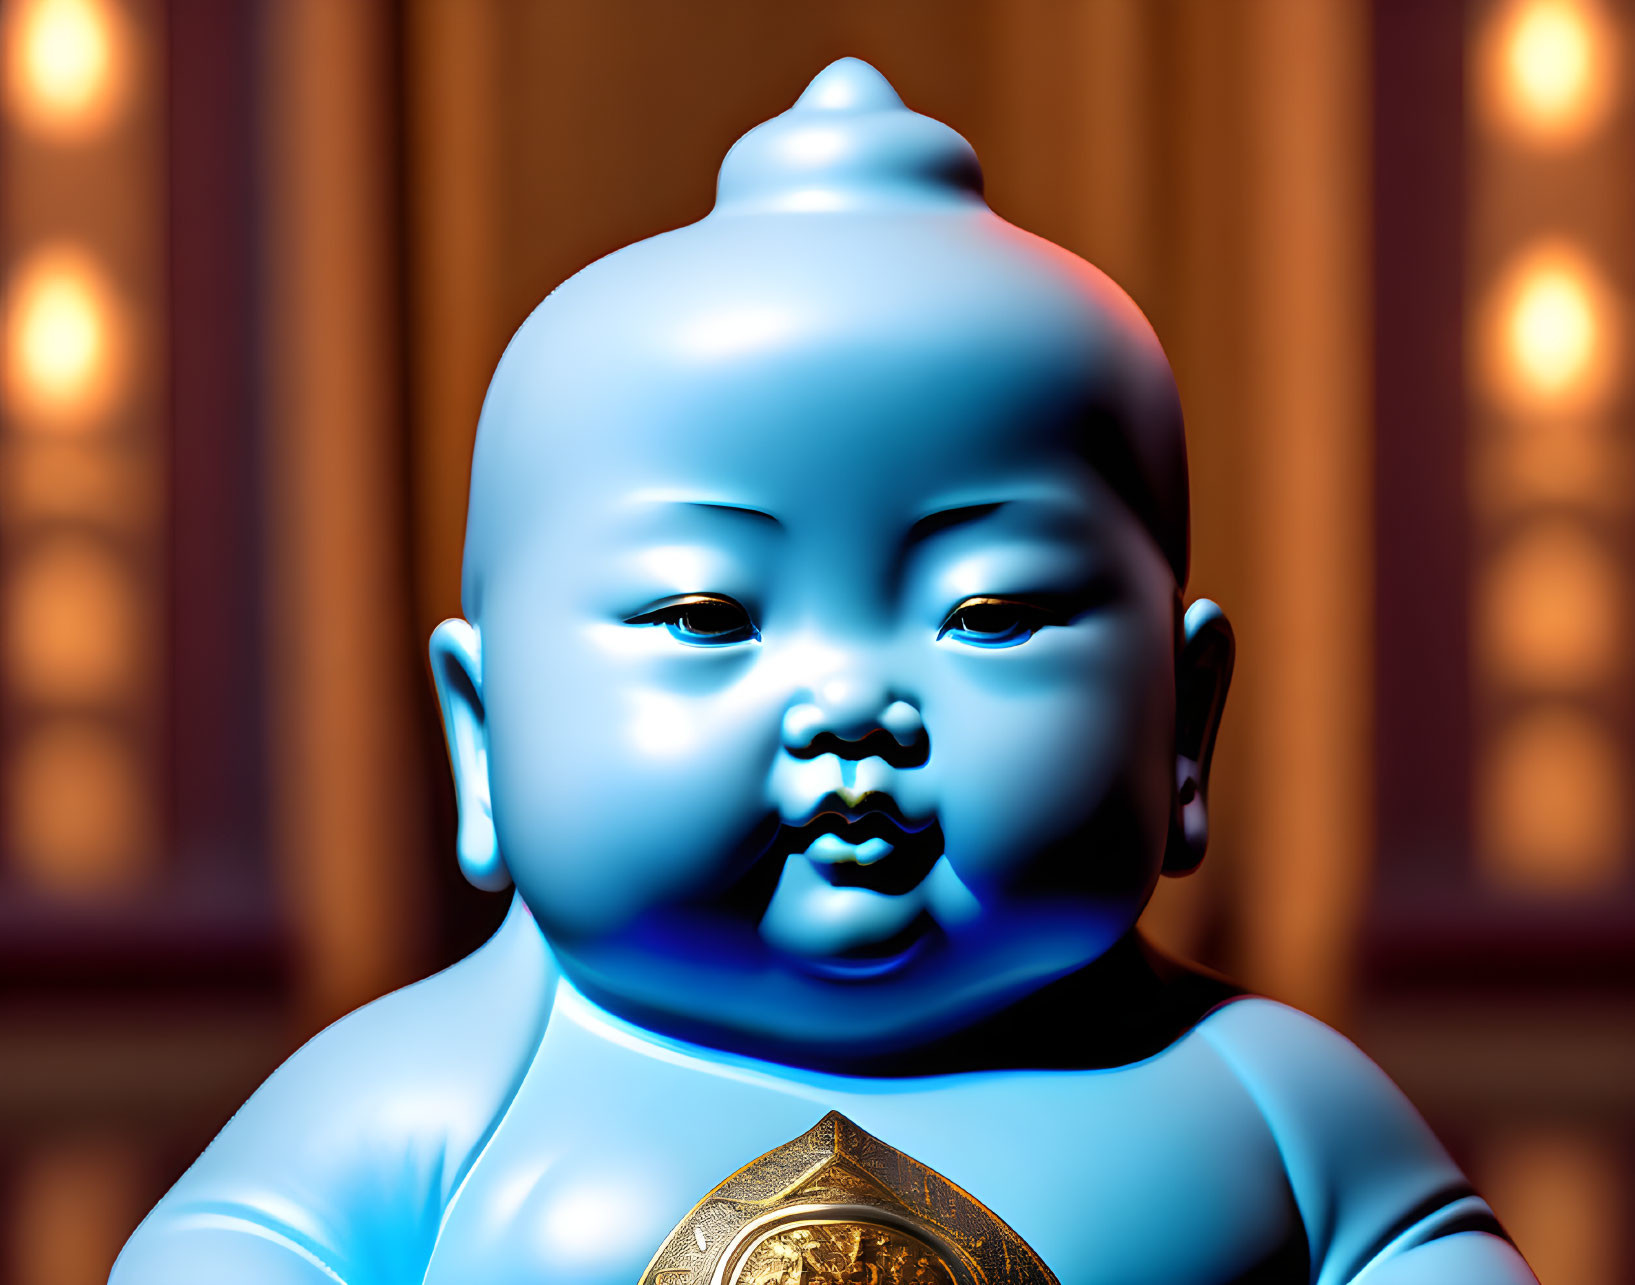 Cerulean Blue Baby Figurine with Asian Features and Golden Emblem